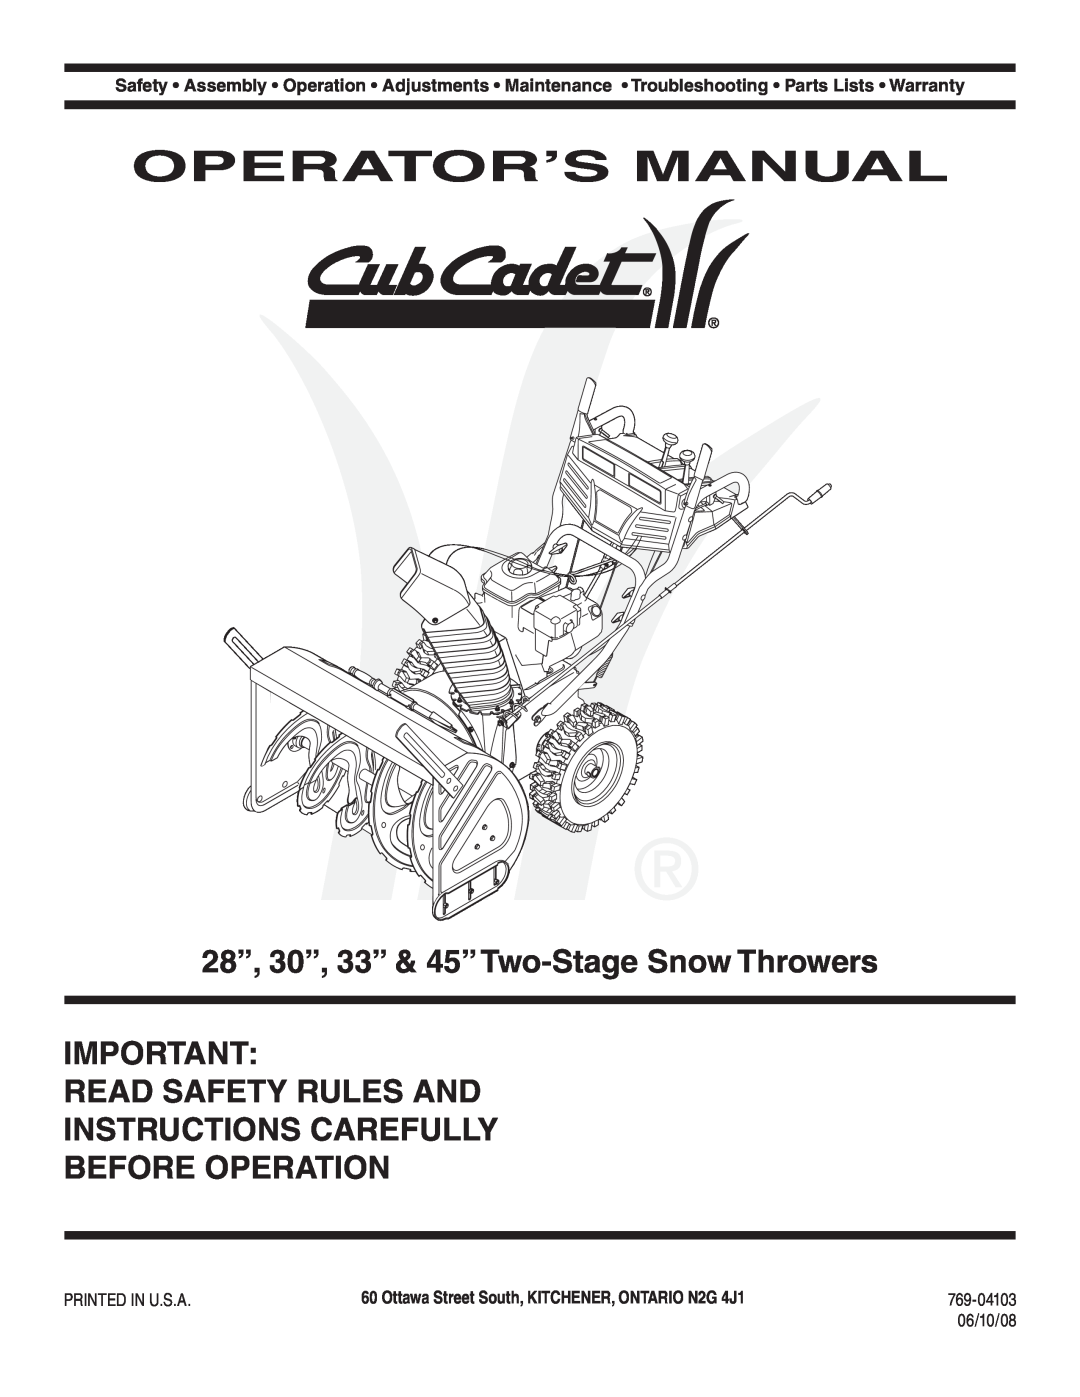 Cub Cadet OEM-390-679 warranty Operator’S Manual, 28”, 30”, 33” & 45”Two-Stage Snow Throwers 